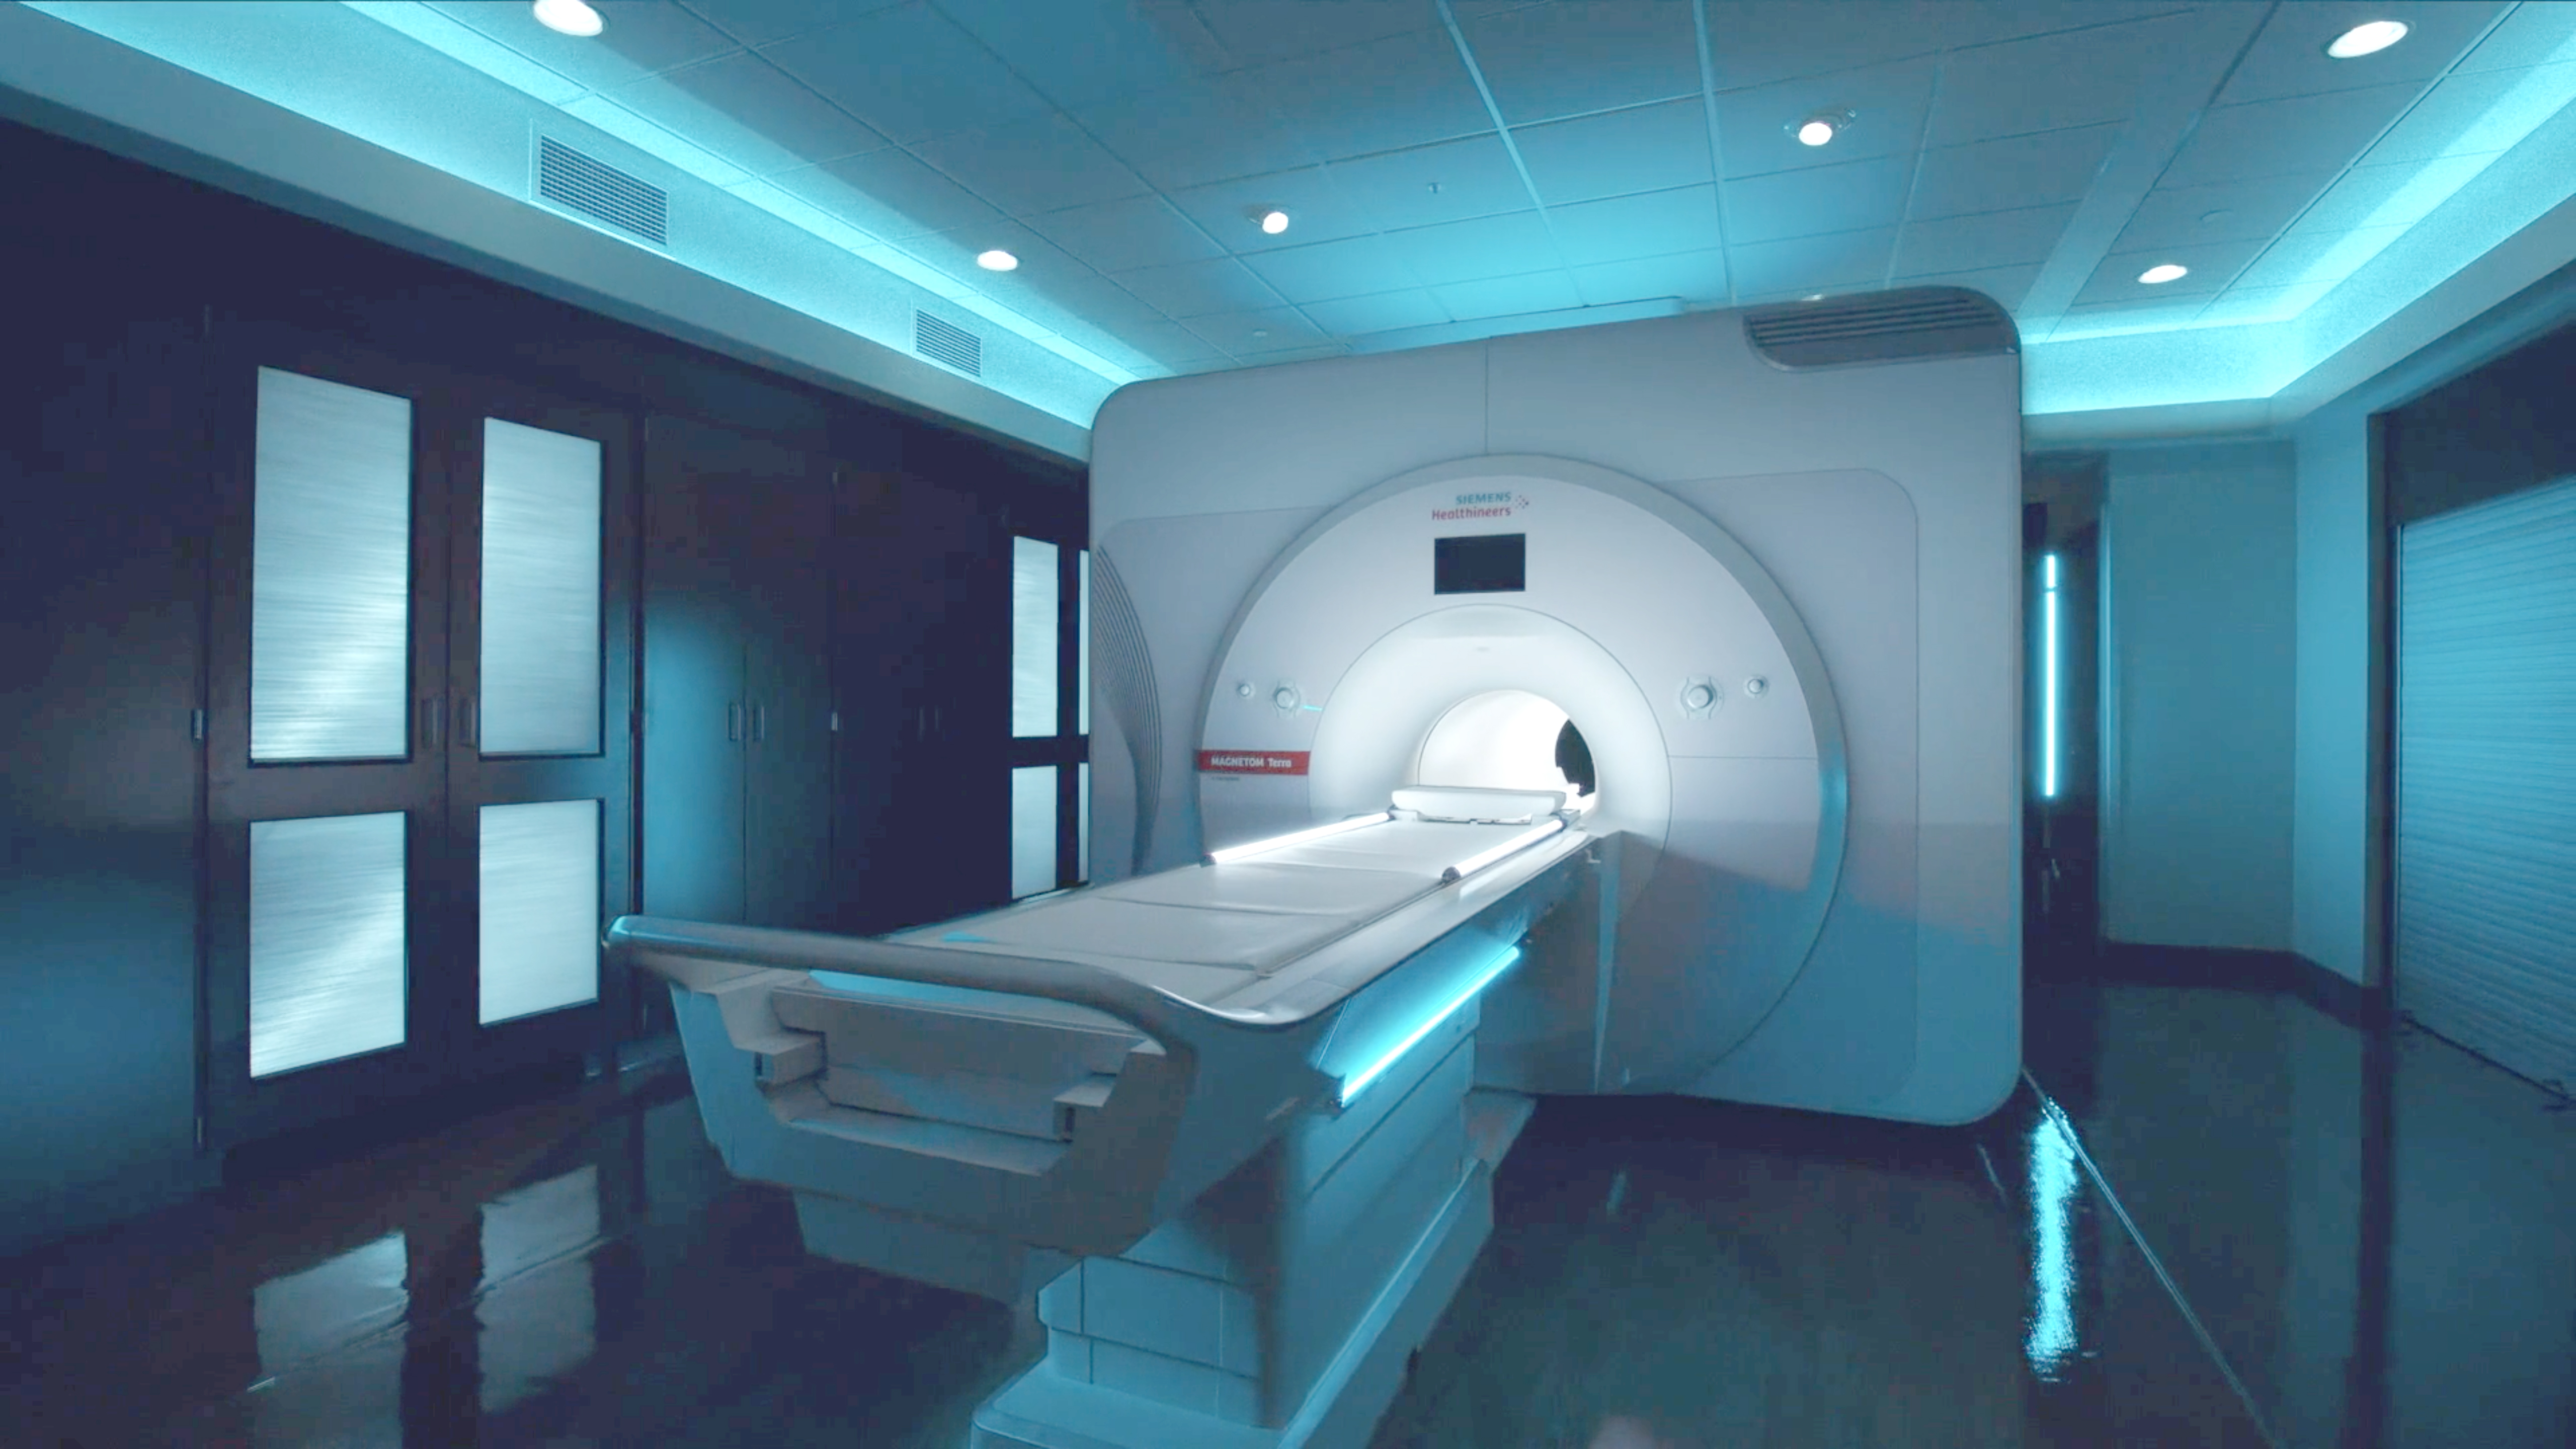 Research collaboration provides insight into use of 7 Tesla MRI